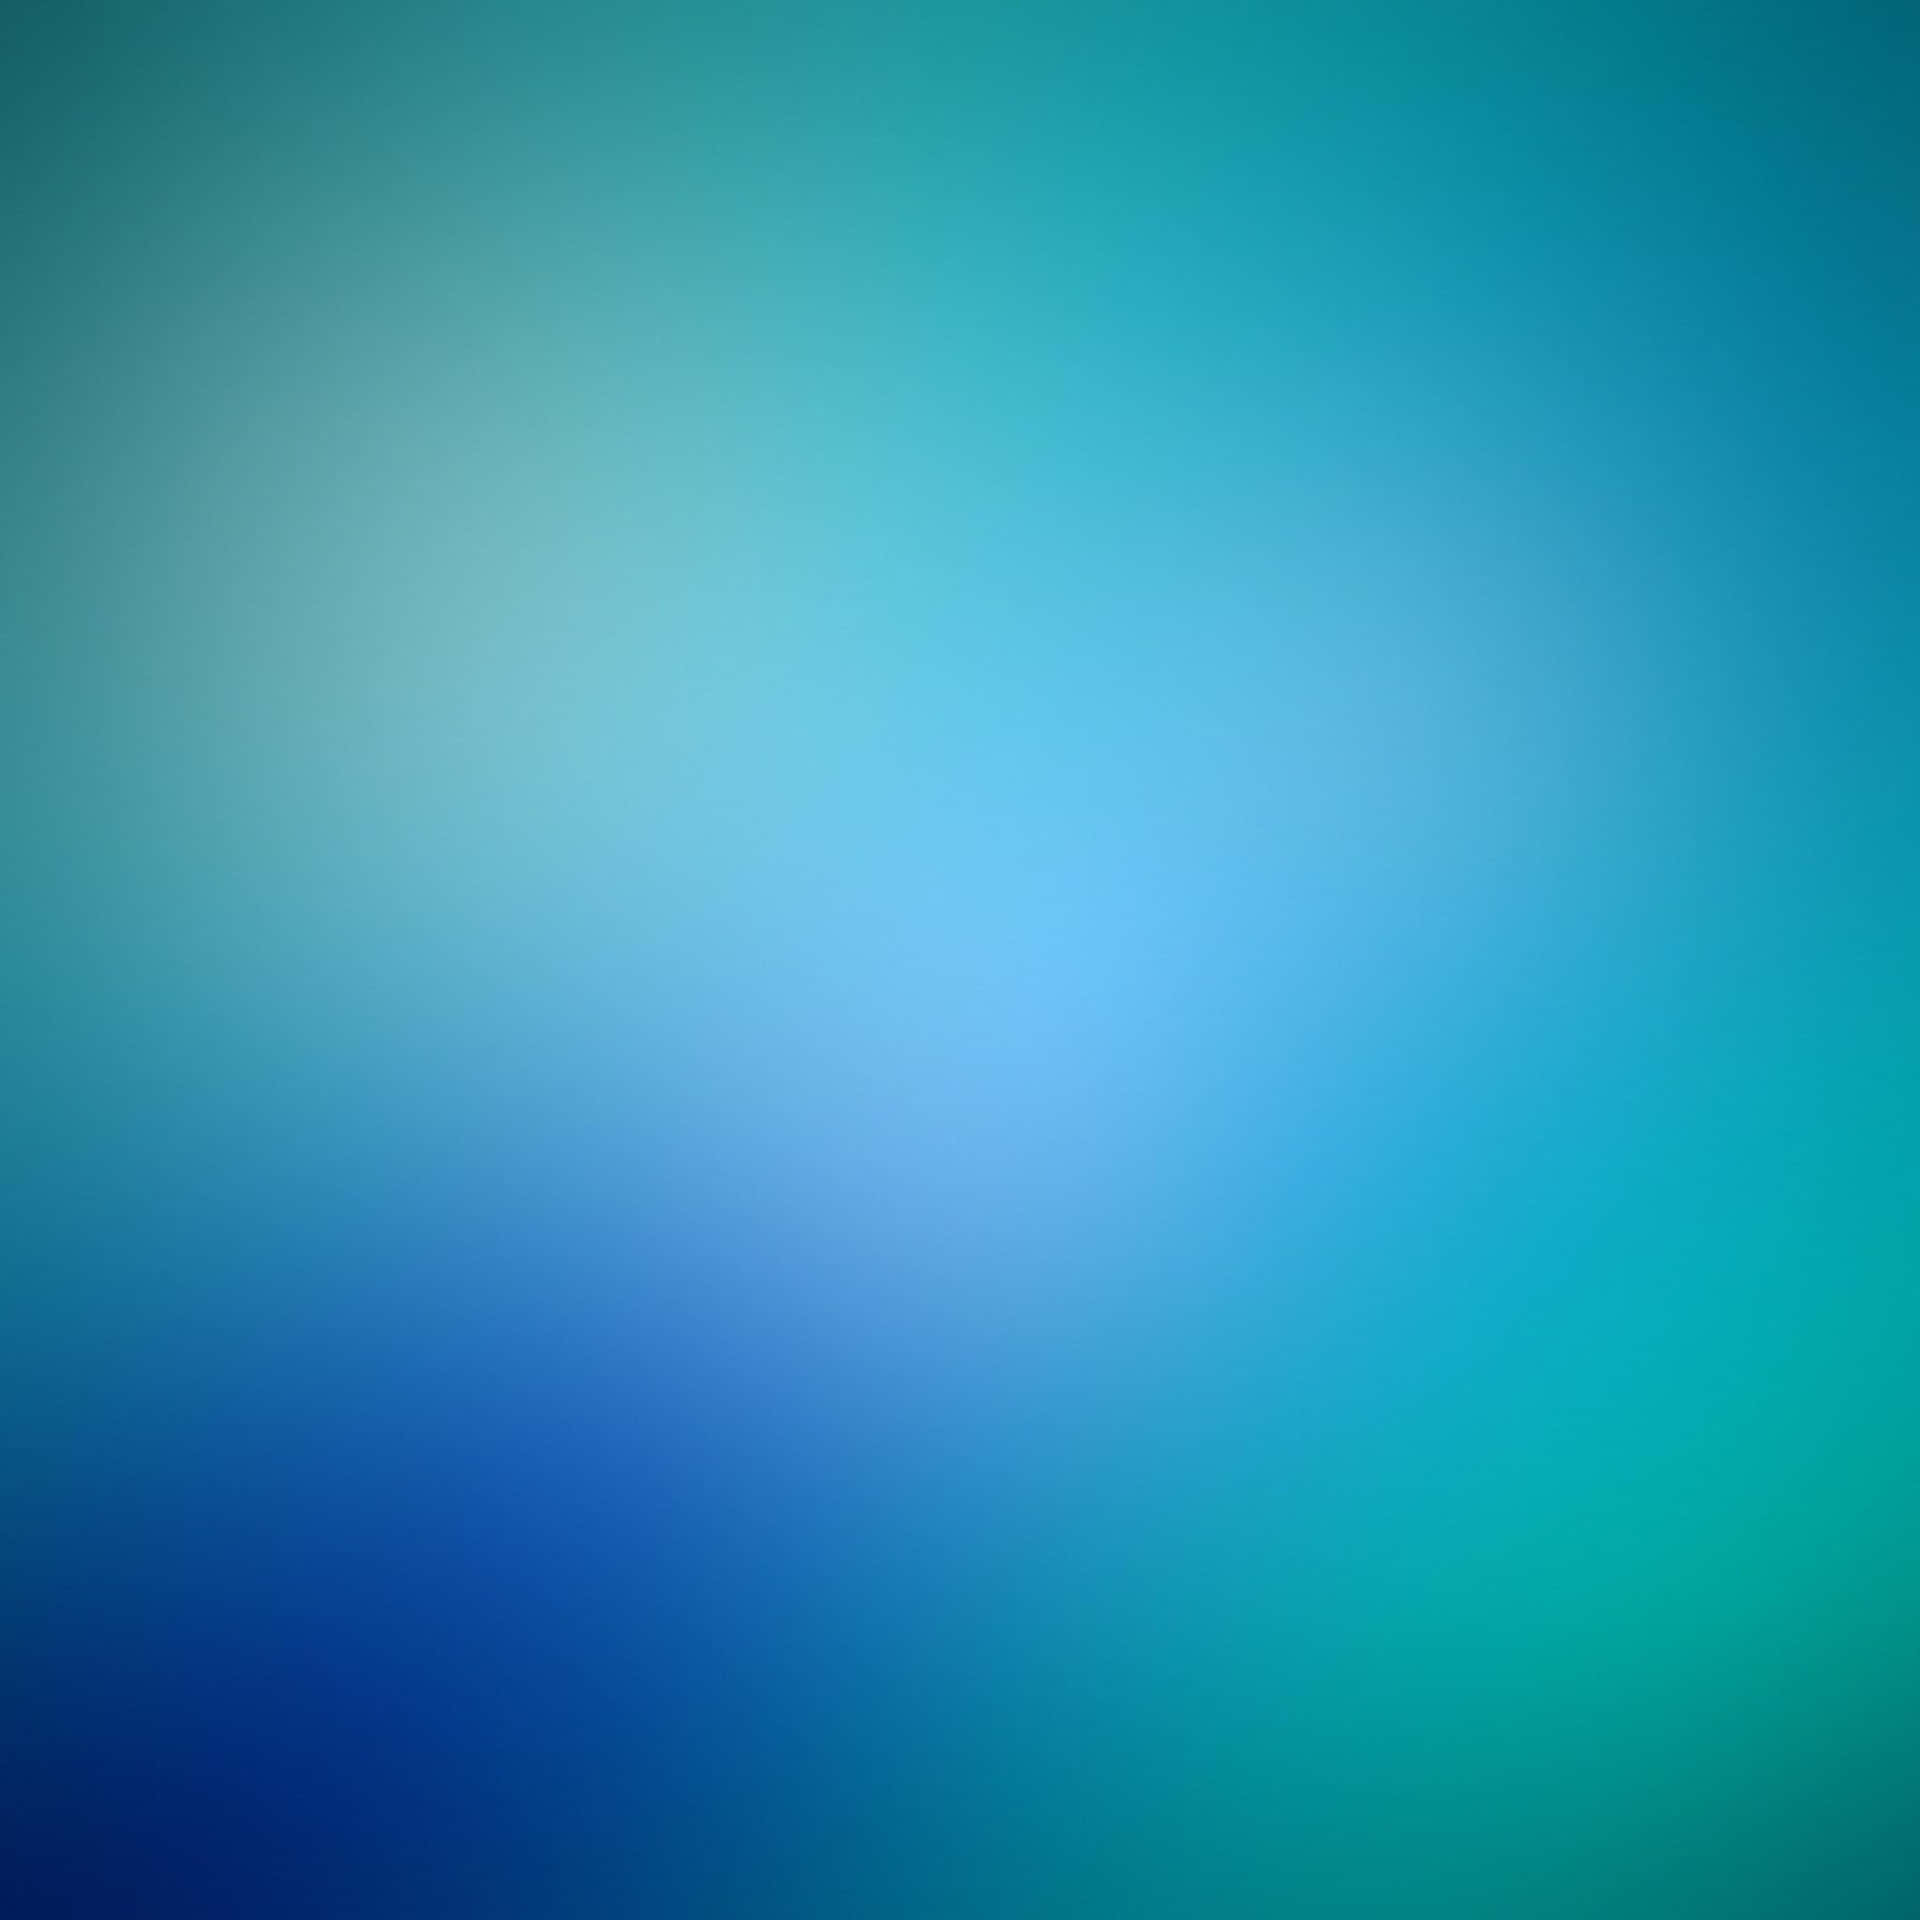 A Blue And Green Blurred Background